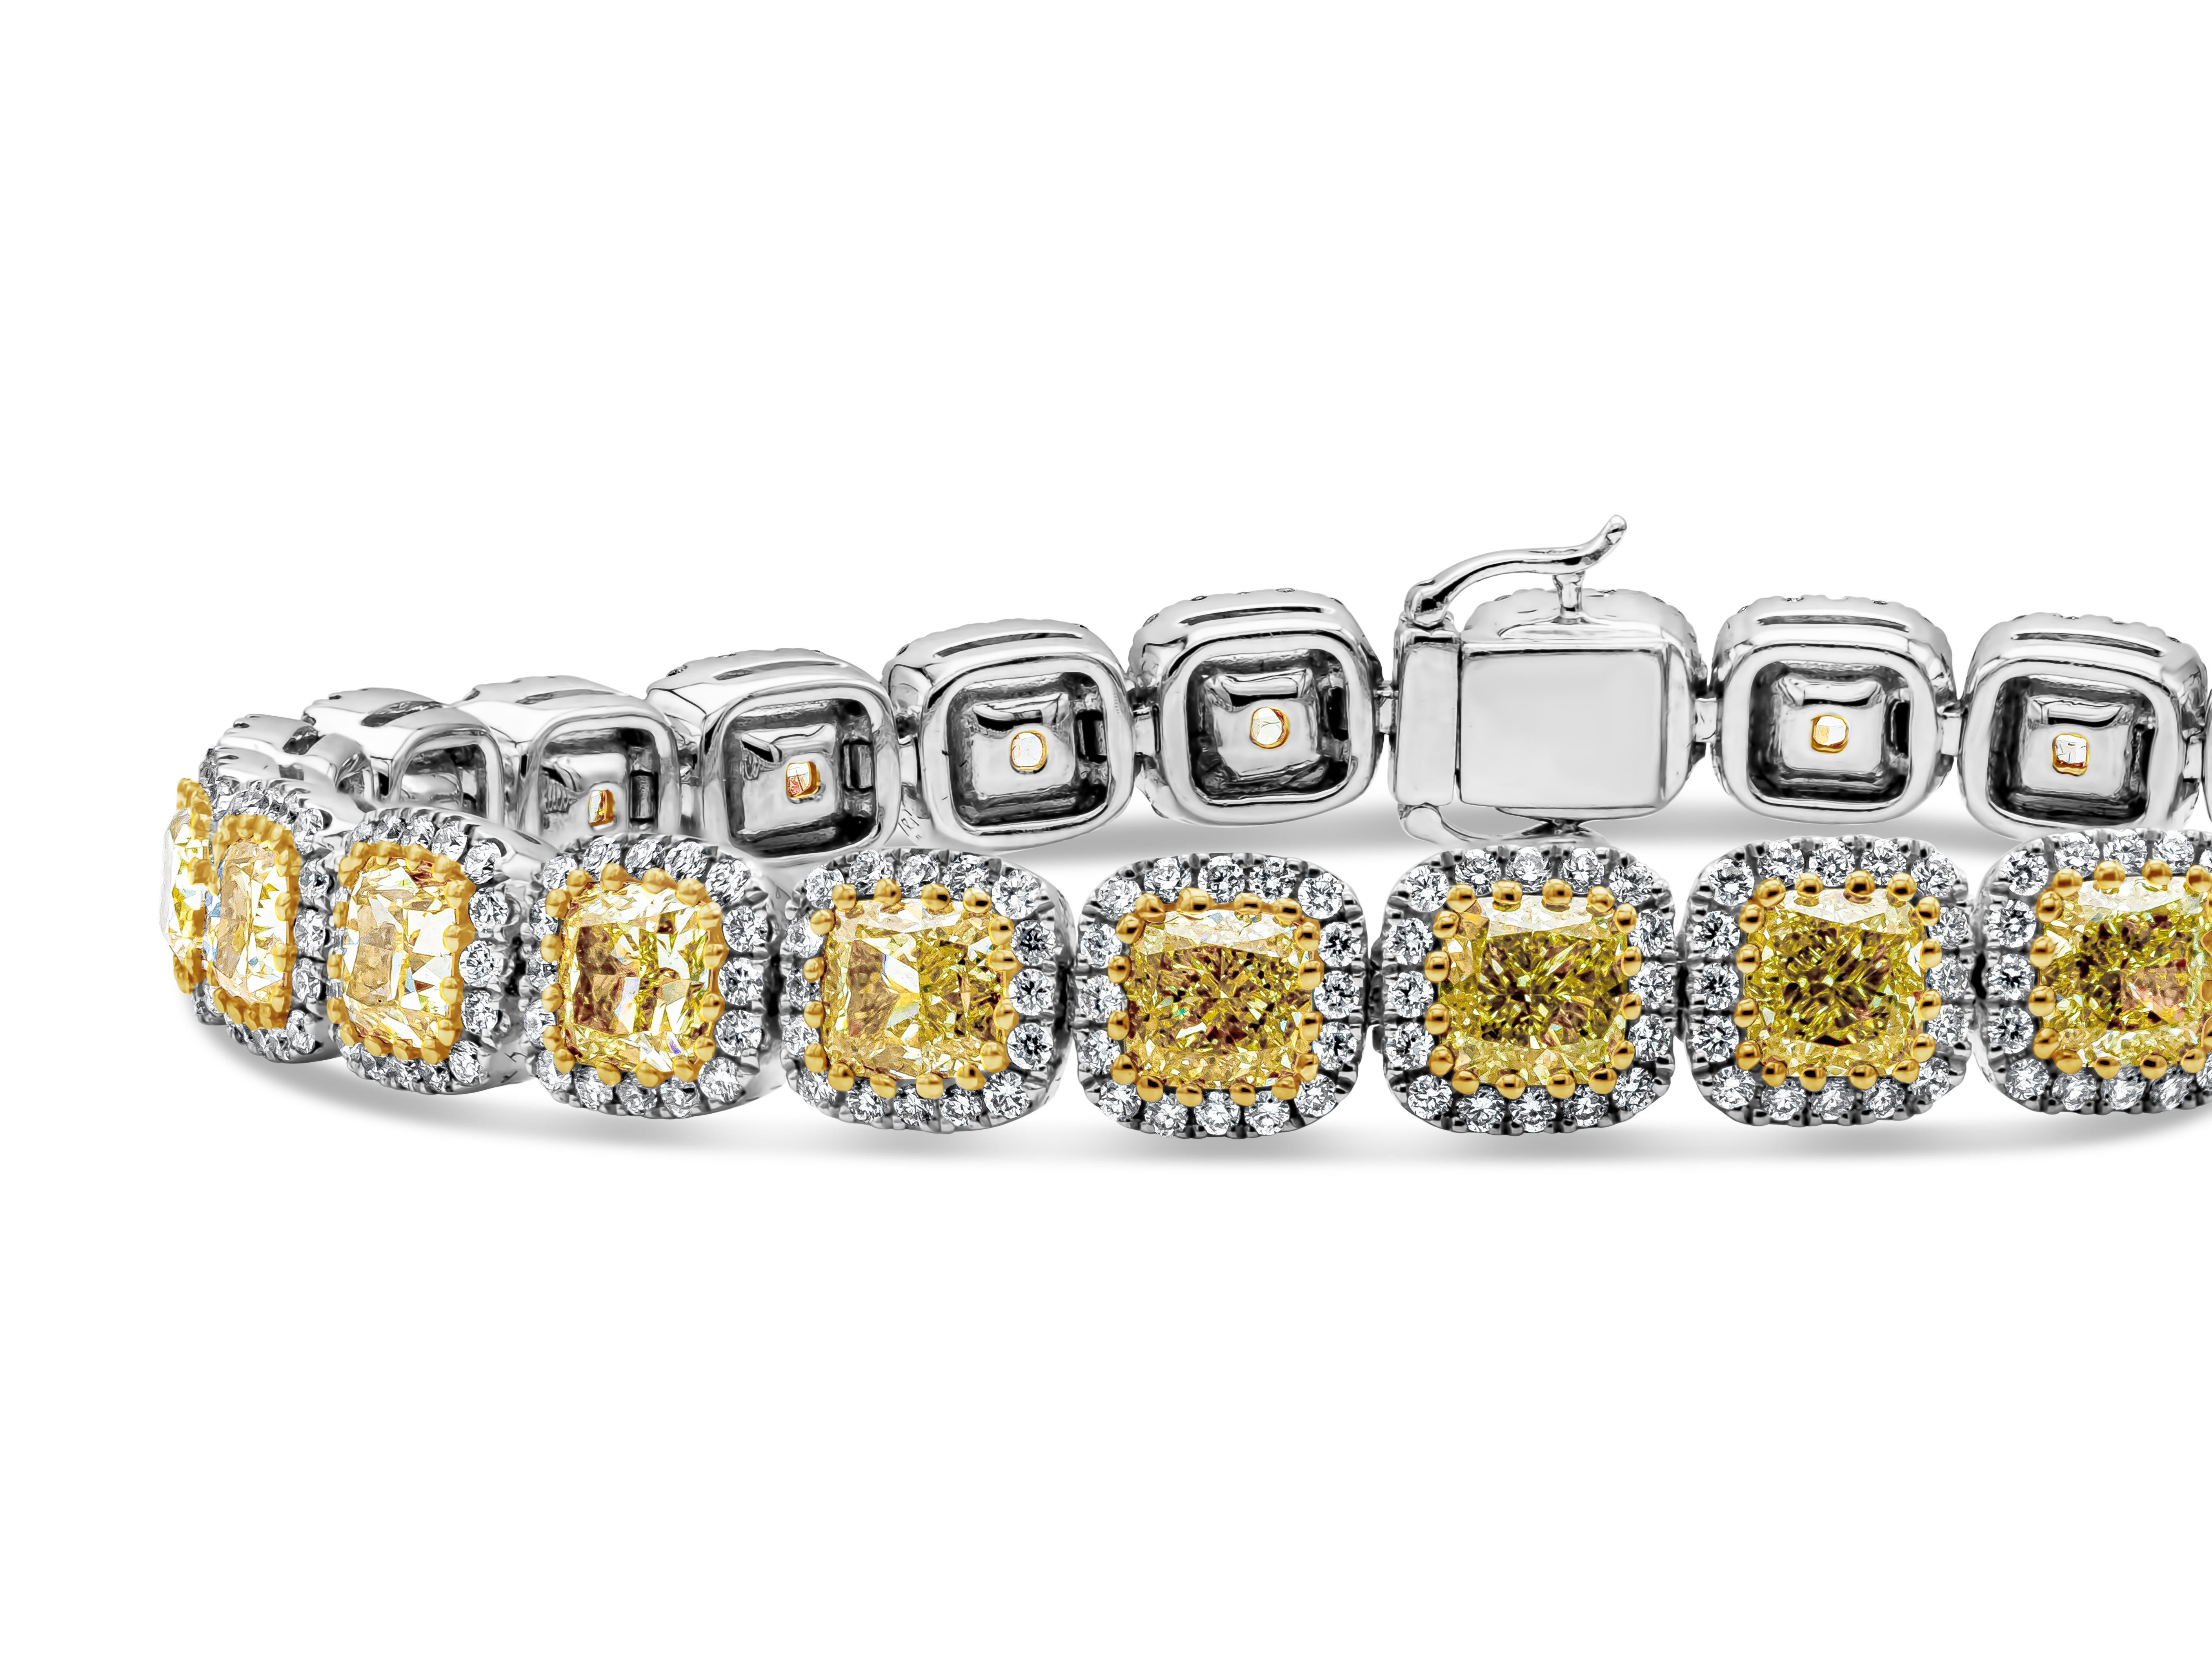 This gorgeous bracelet features 27 cushion cut fancy yellow diamonds weighing 12.92 carats total. Each stone is surrounded by a single row of brilliant round diamonds weighing 2.04 carats total.  Made with 18 karats of yellow and white gold. 

Roman